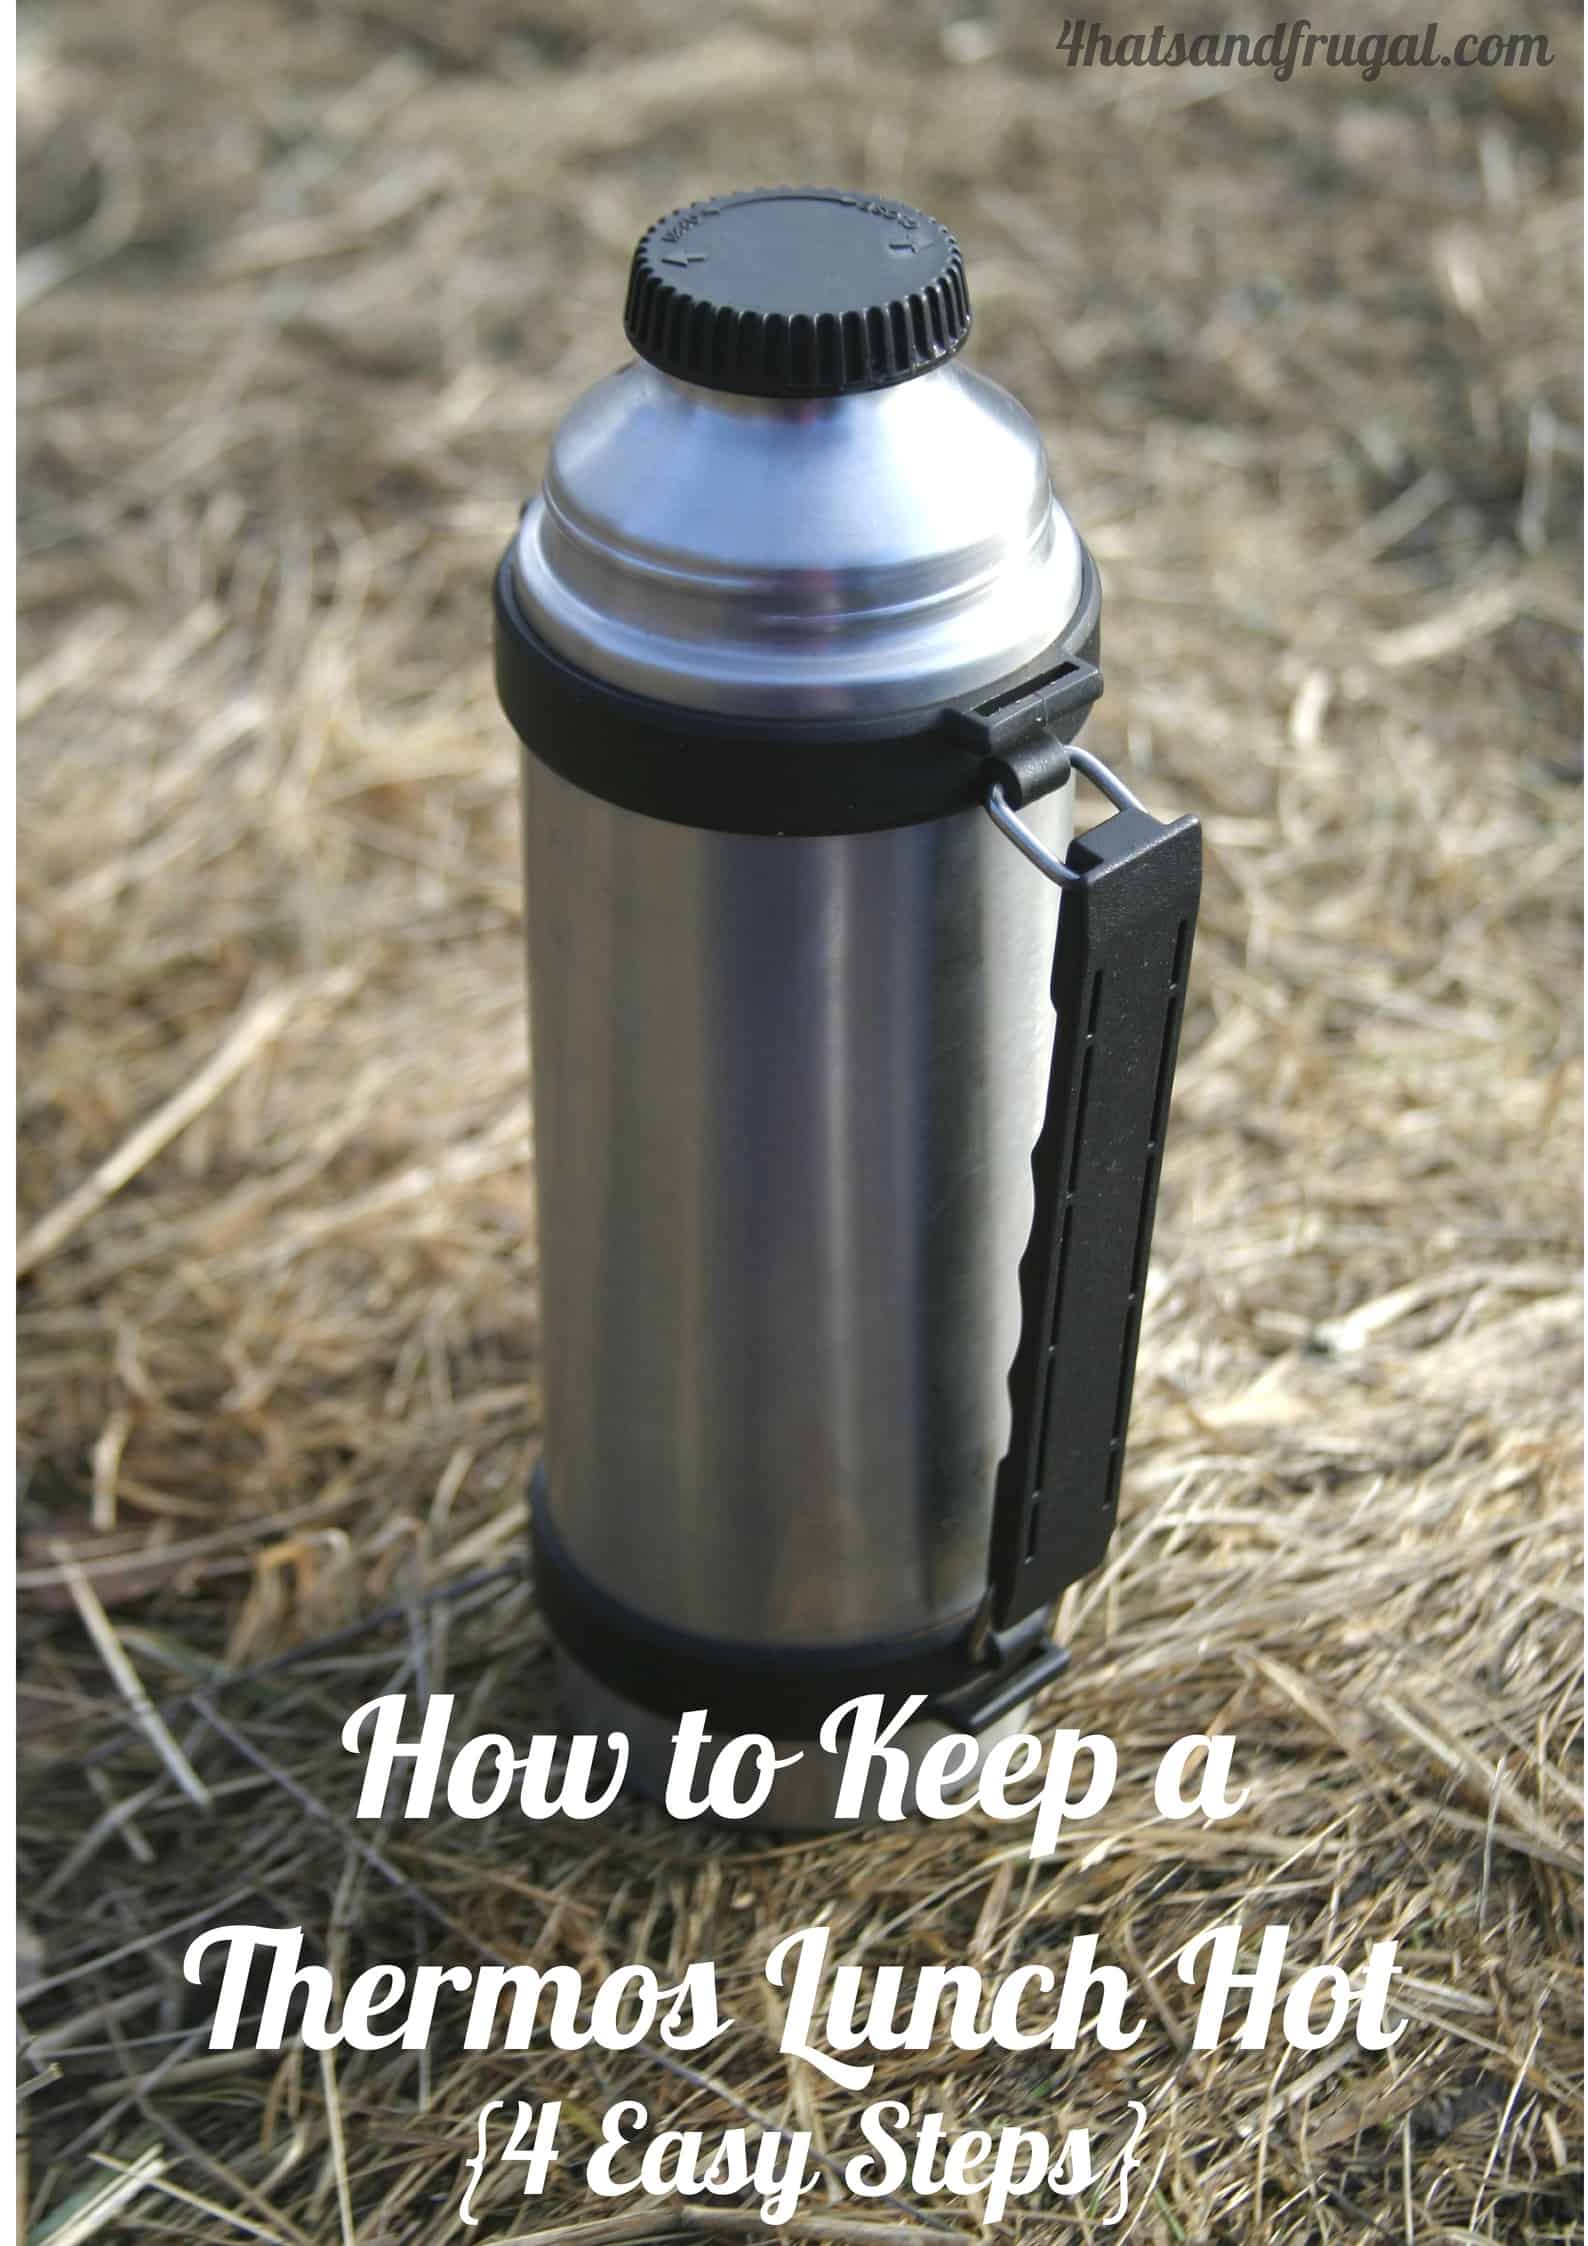 https://4hatsandfrugal.com/wp-content/uploads/2013/01/Keep-Thermos-Lunch-Hot1.jpg